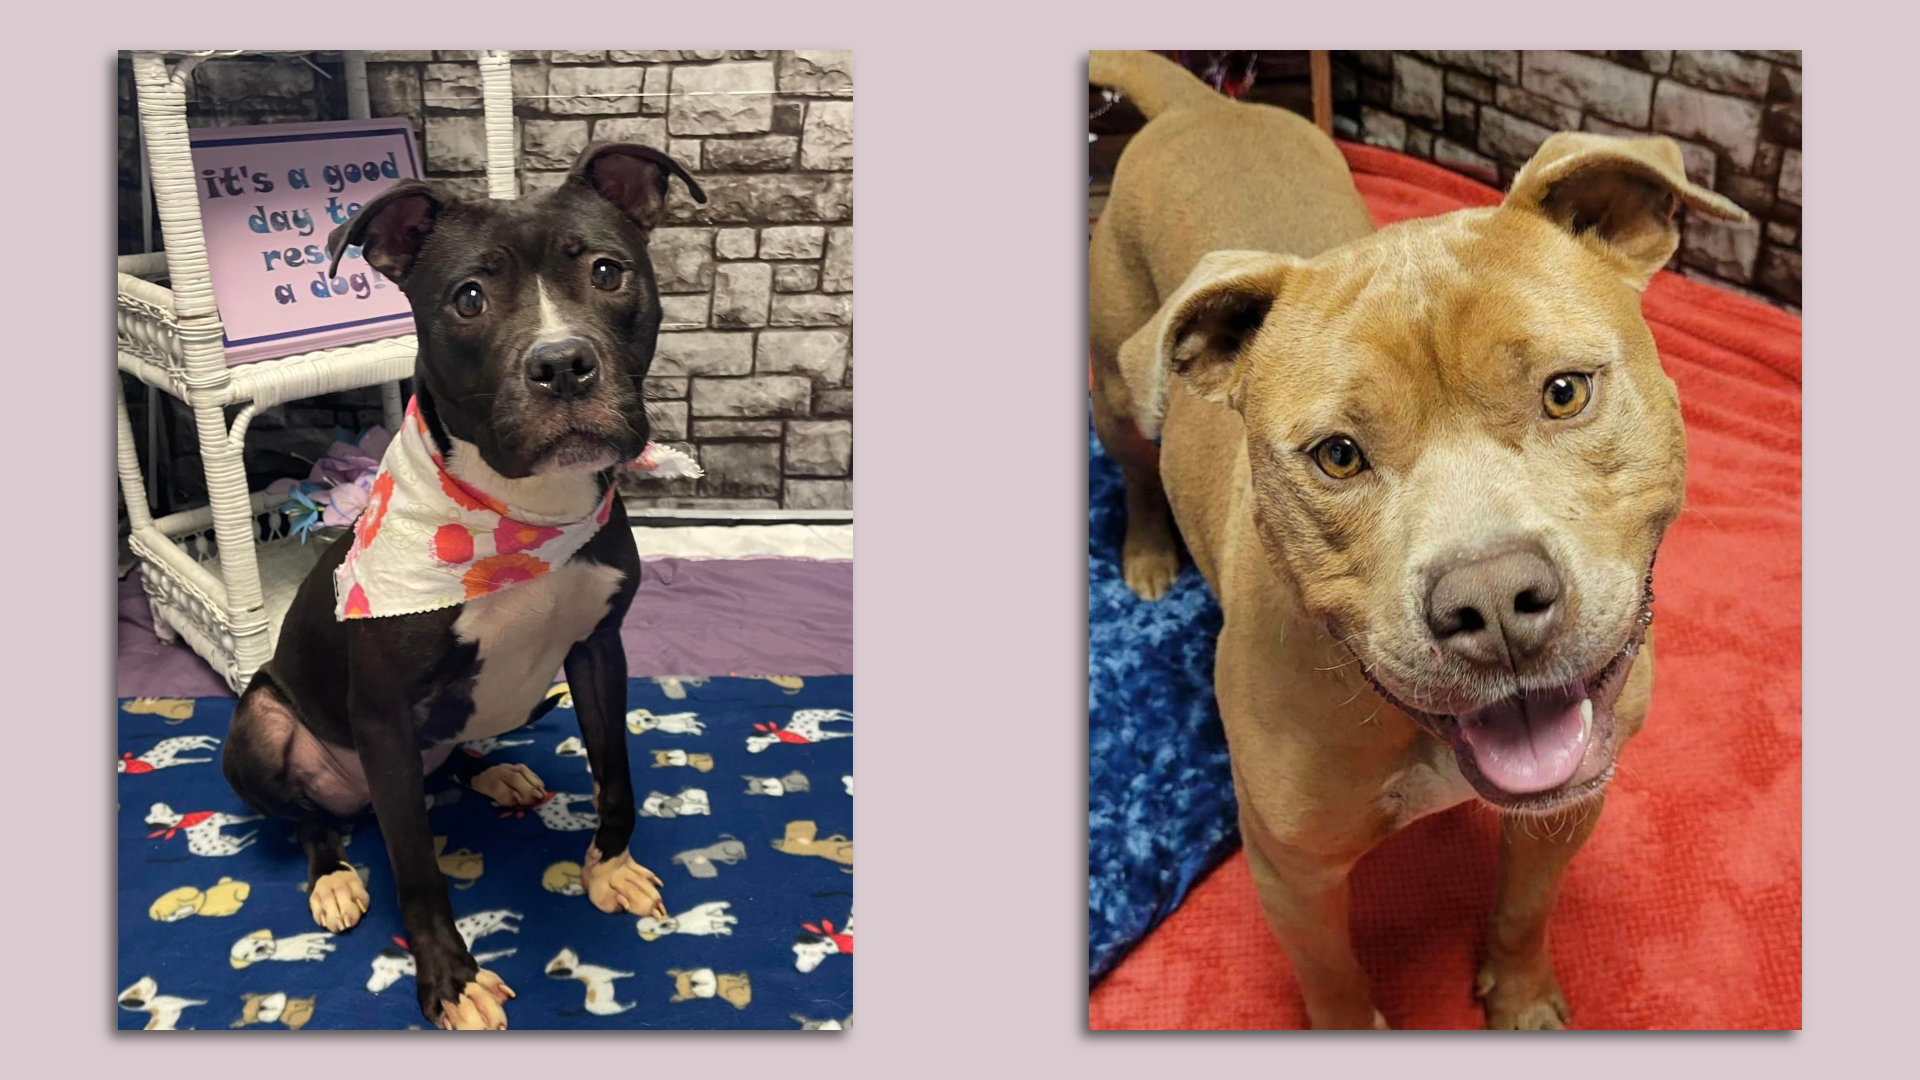 Dogs currently adoptable at the Detroit Animal Care shelter: Lindsay Lou, No. A157747, around 2.5 years old (left) and Urno, No. A156835, around 2.5 years old.